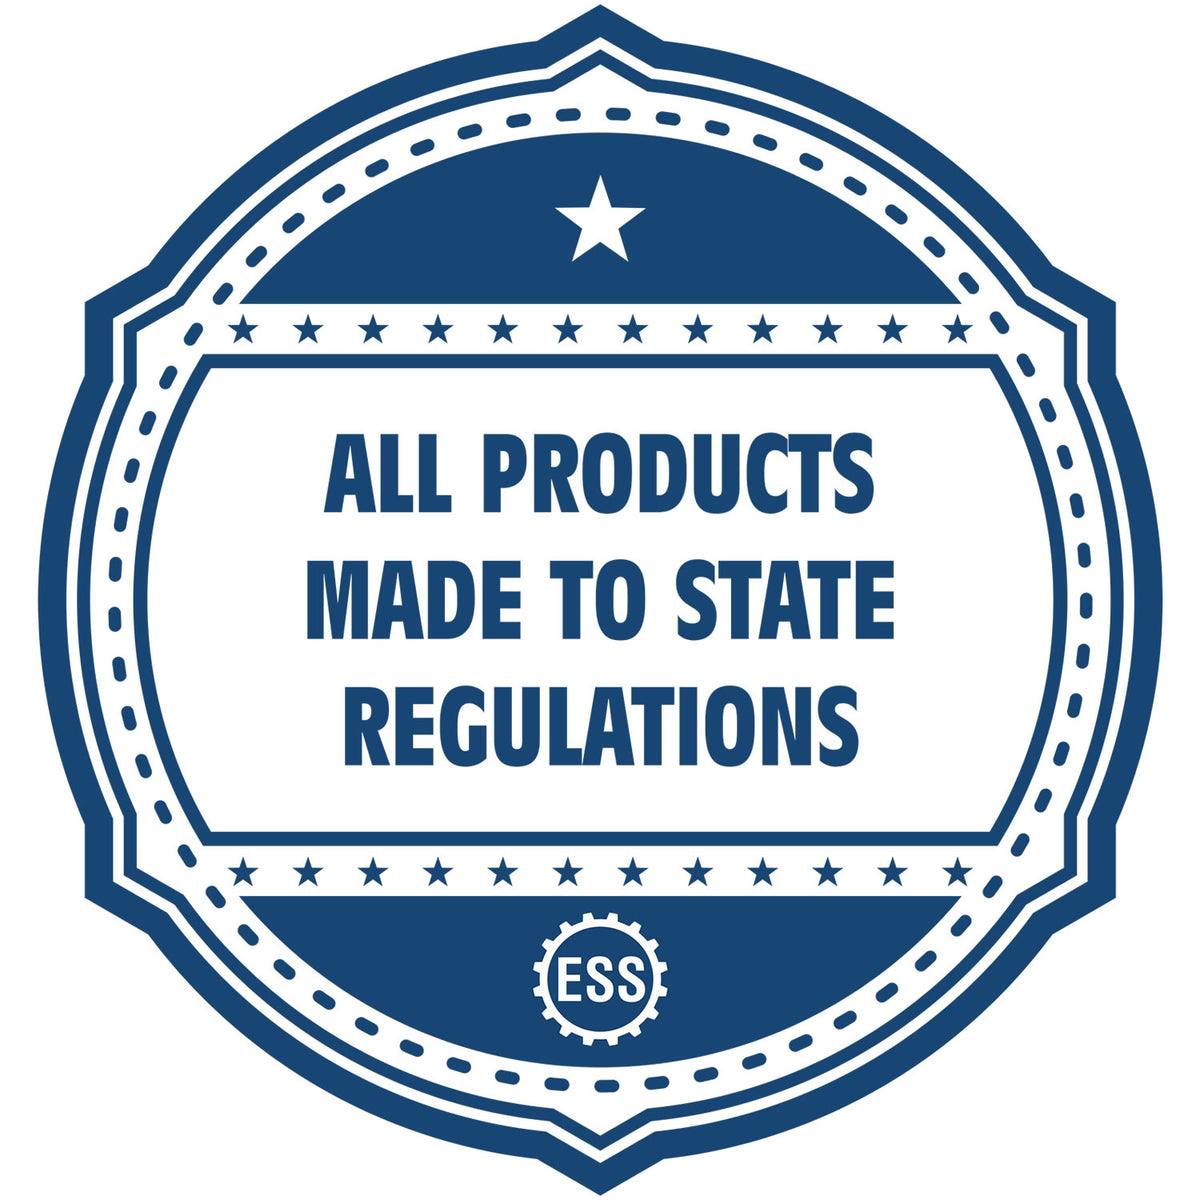 A blue icon or badge for the Hybrid Pennsylvania Engineer Seal showing that this product is made in compliance with state regulations.